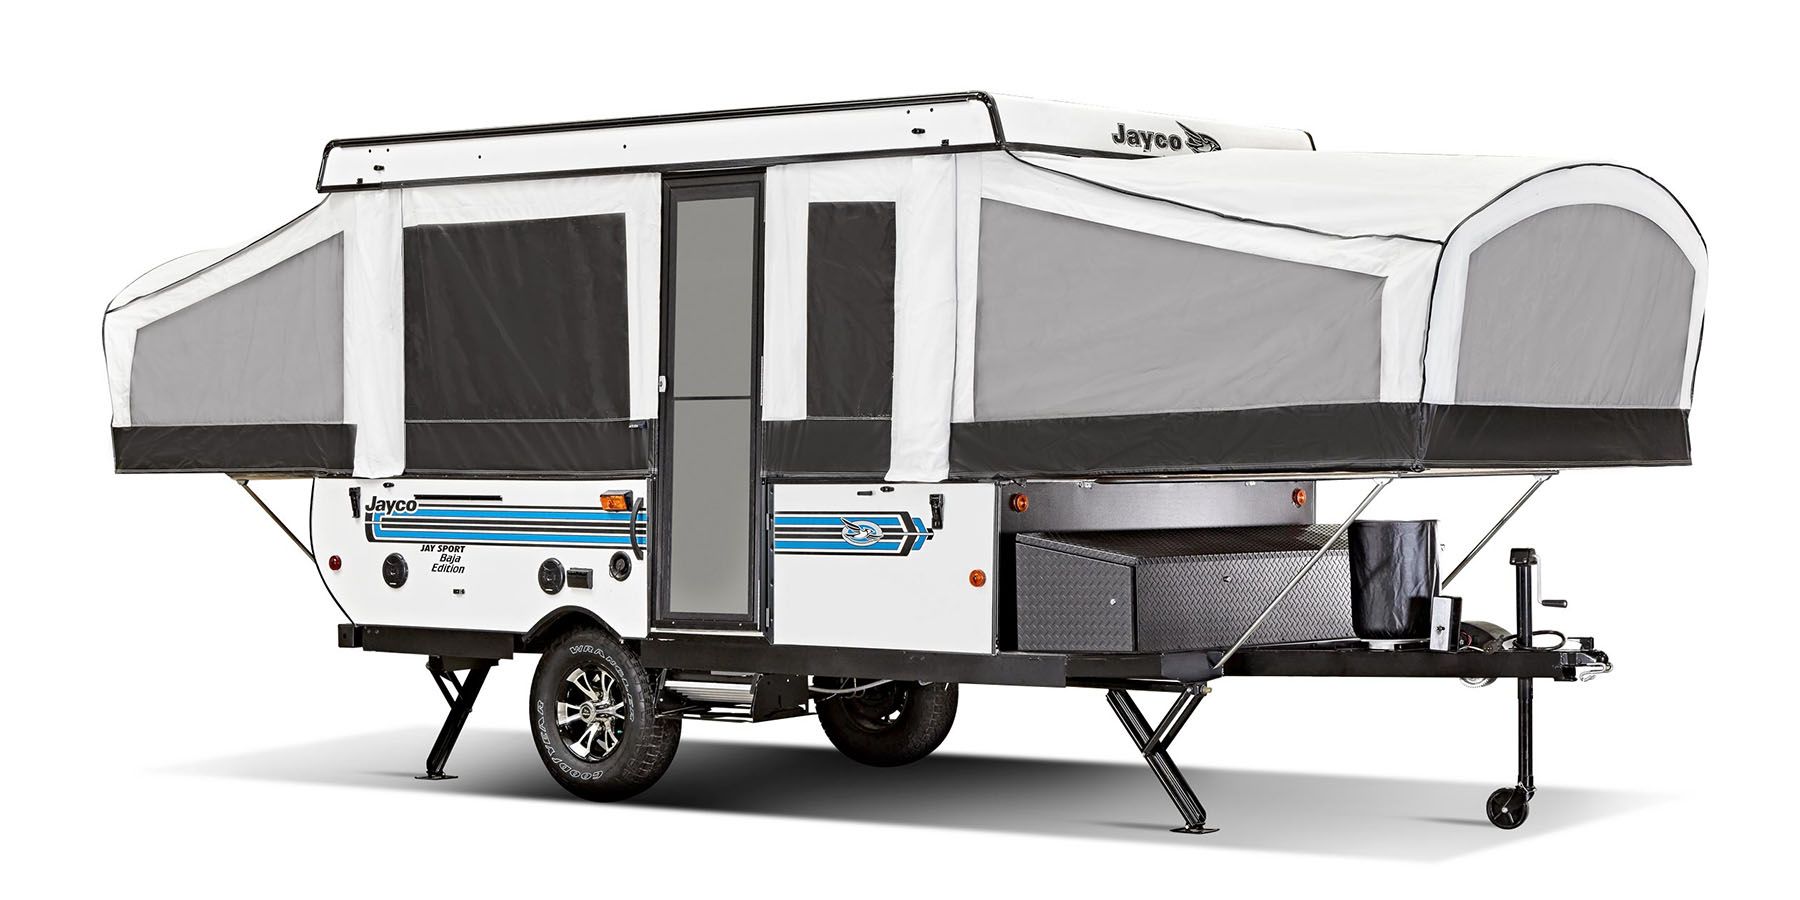 Jayco Jay Sport 2019 feature image